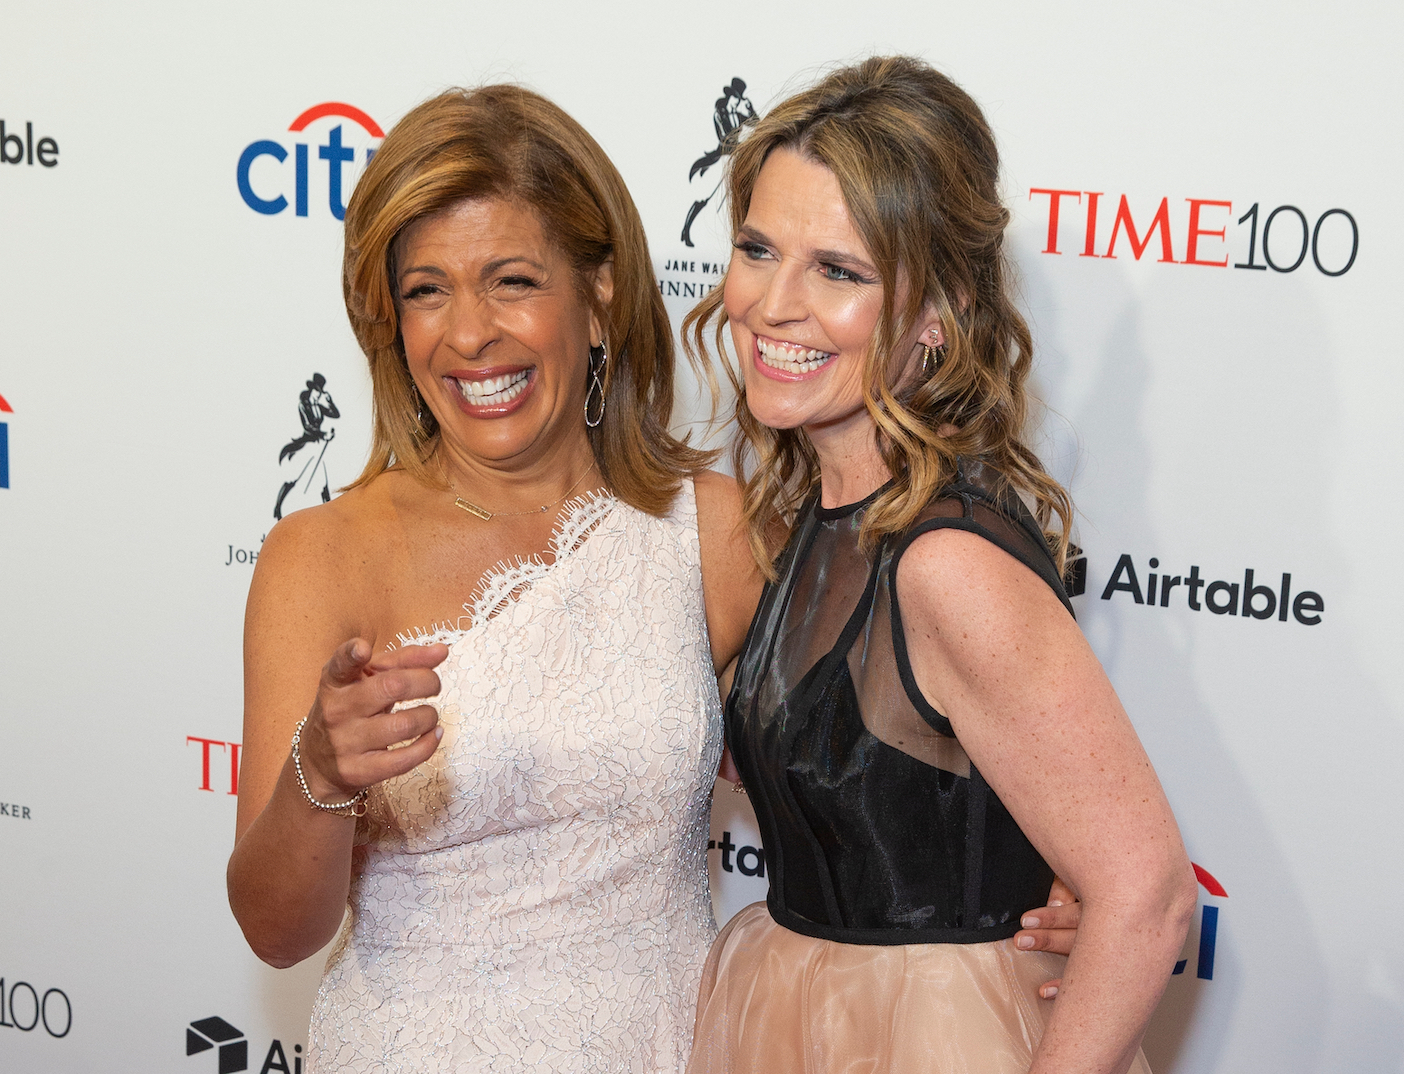 Shady Insider explains the Rumored ‘Tension’Between Savannah Guthrie and Hoda Kotb ‘Today’